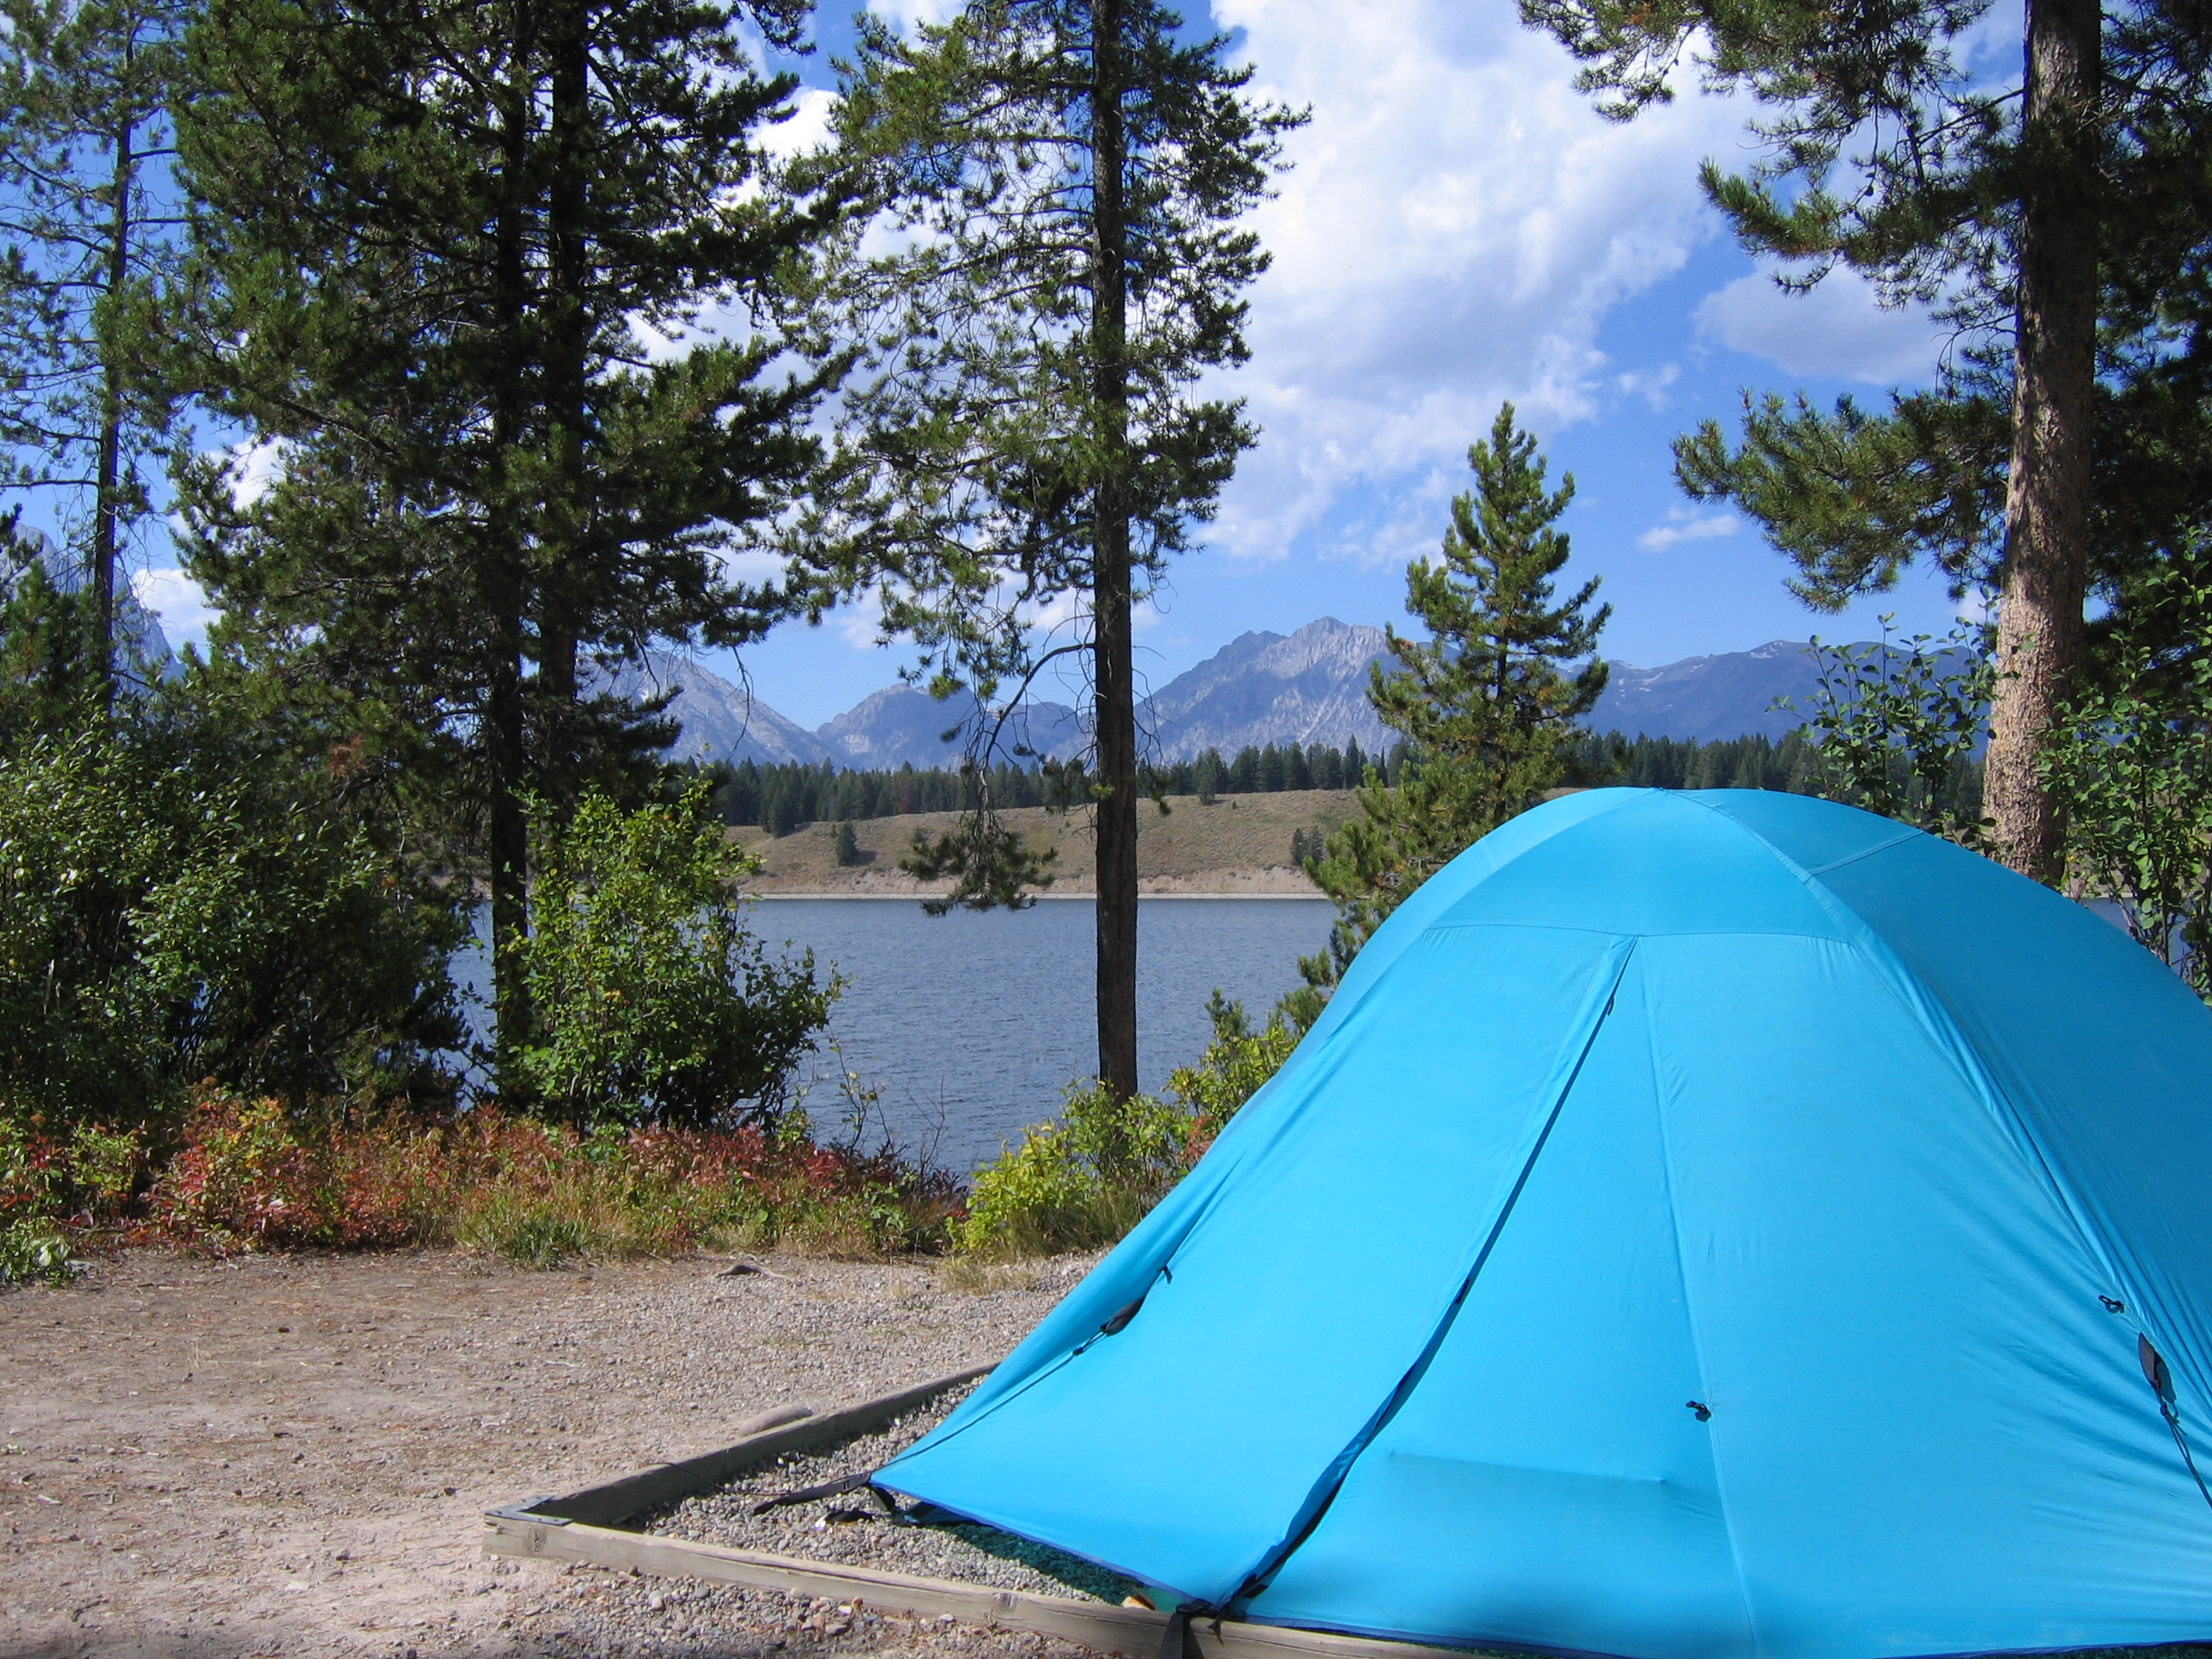 Blue tent with Jackson Lake and the Teton Range in the background